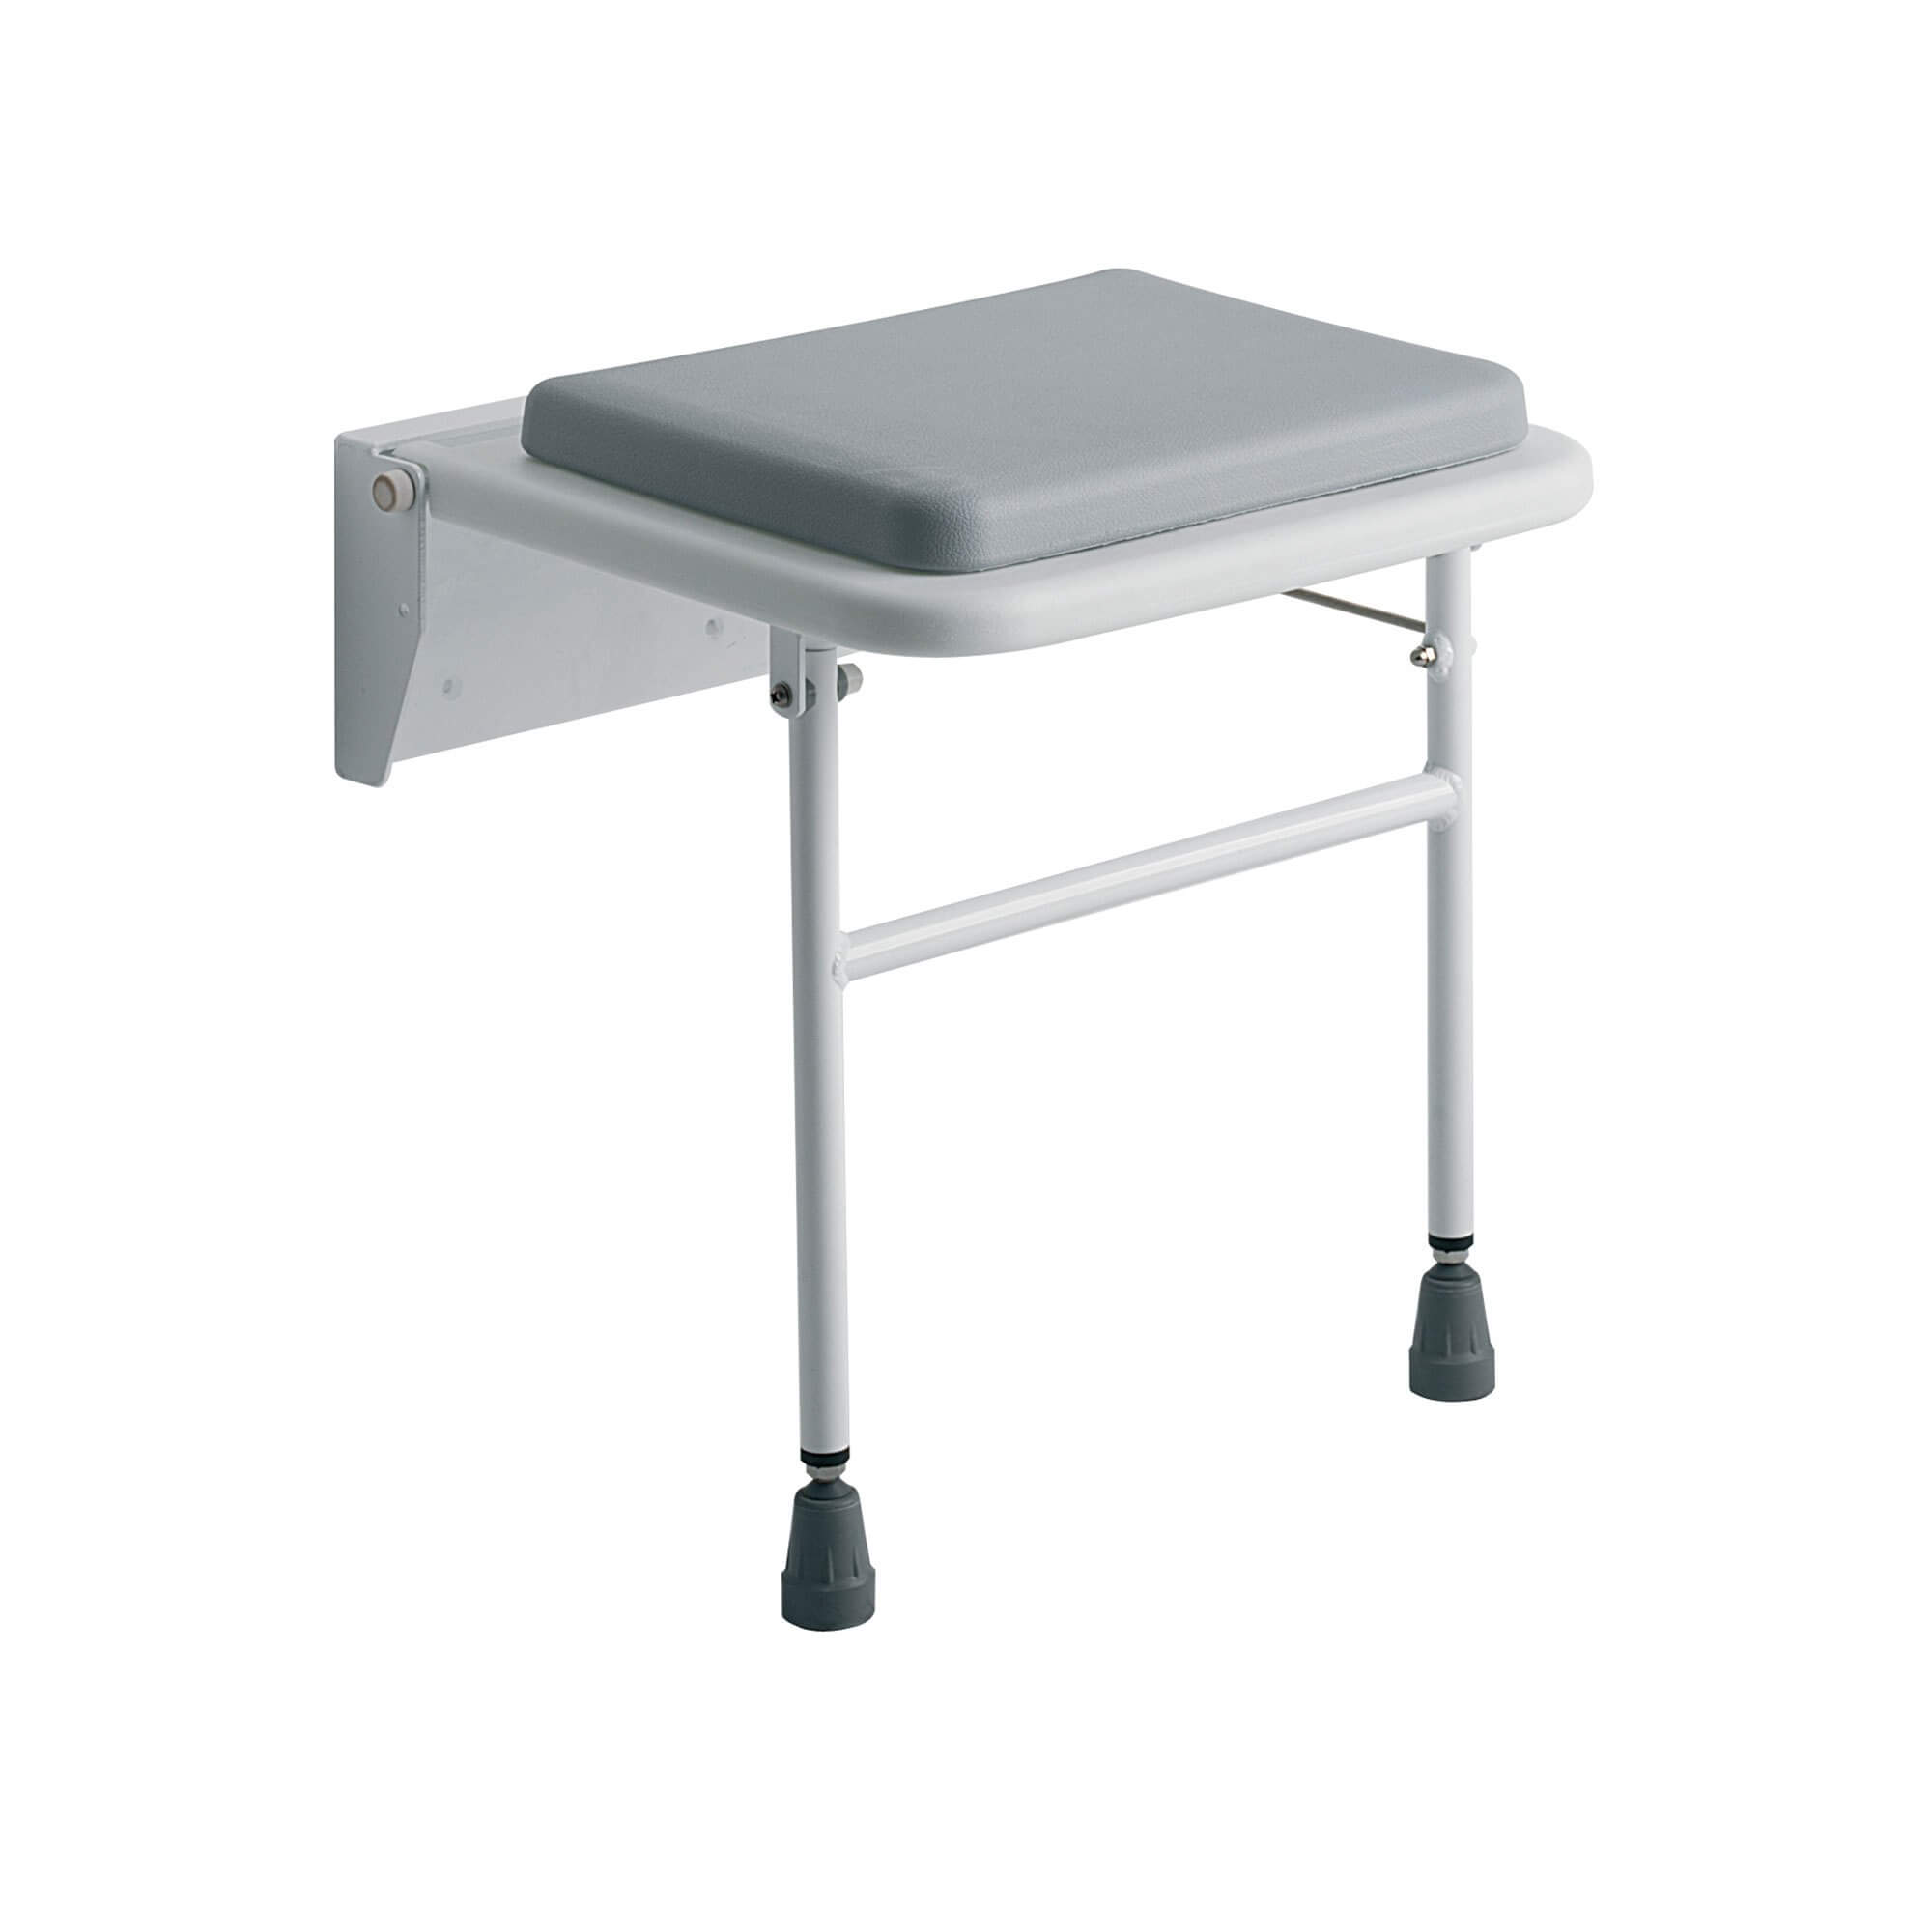 Wall mounted shower stool